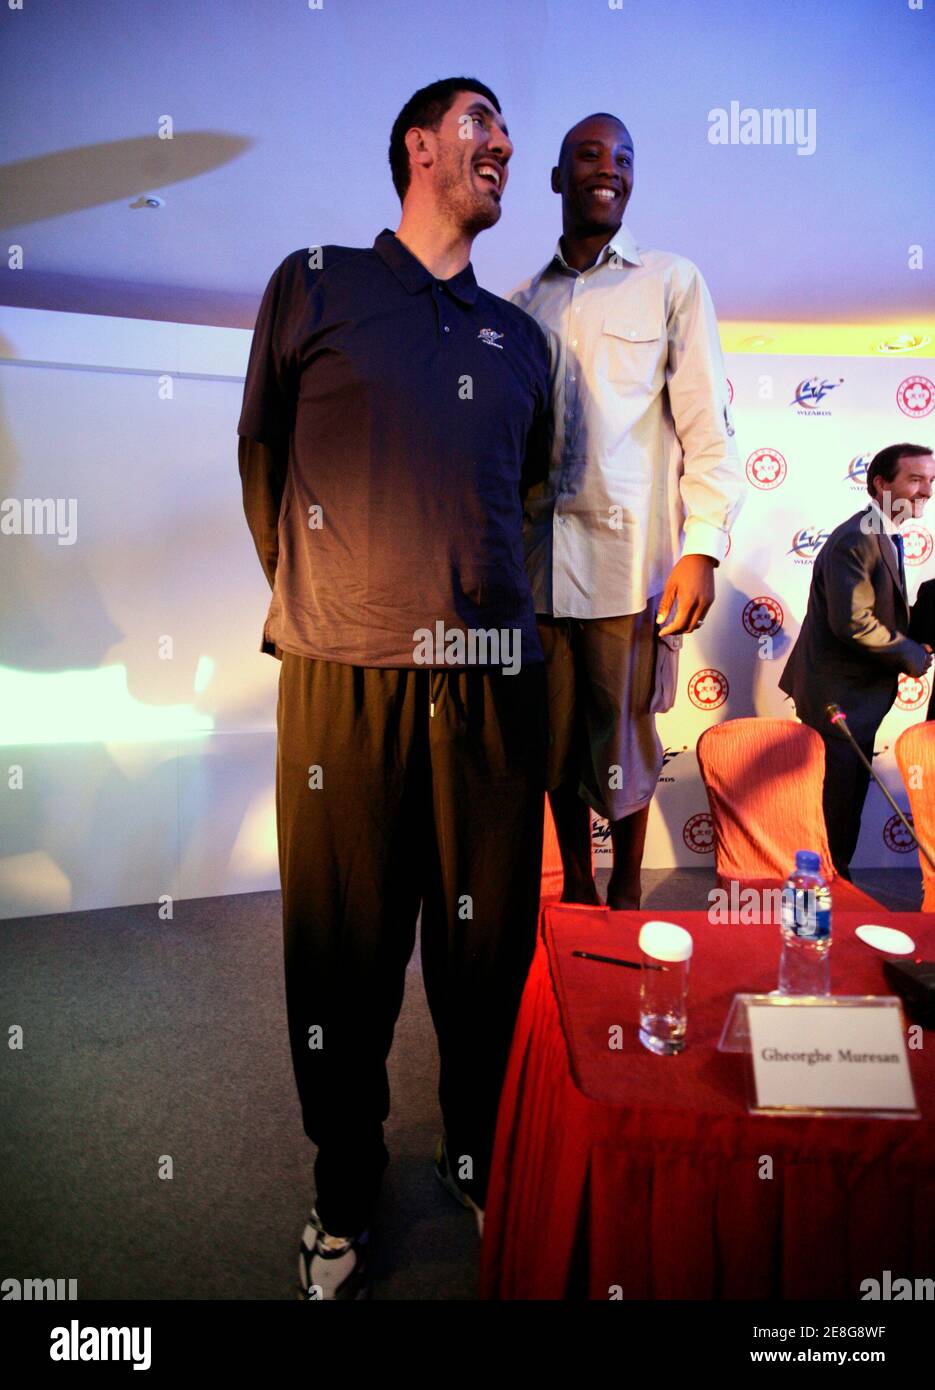 Washington Wizards player Caron Butler (R) stands on a chair while posing with former Bullets player Gheorghe Muresan of Romania during a news conference in Beijing September 8, 2009. The Wizards are commemorating the 30th anniversary of the team's 1979 trip to China with a 10-day, five-city goodwill tour. The Wizards were previously known as the Washington Bullets.  REUTERS/Jason Lee (CHINA SPORT BASKETBALL) Stock Photo